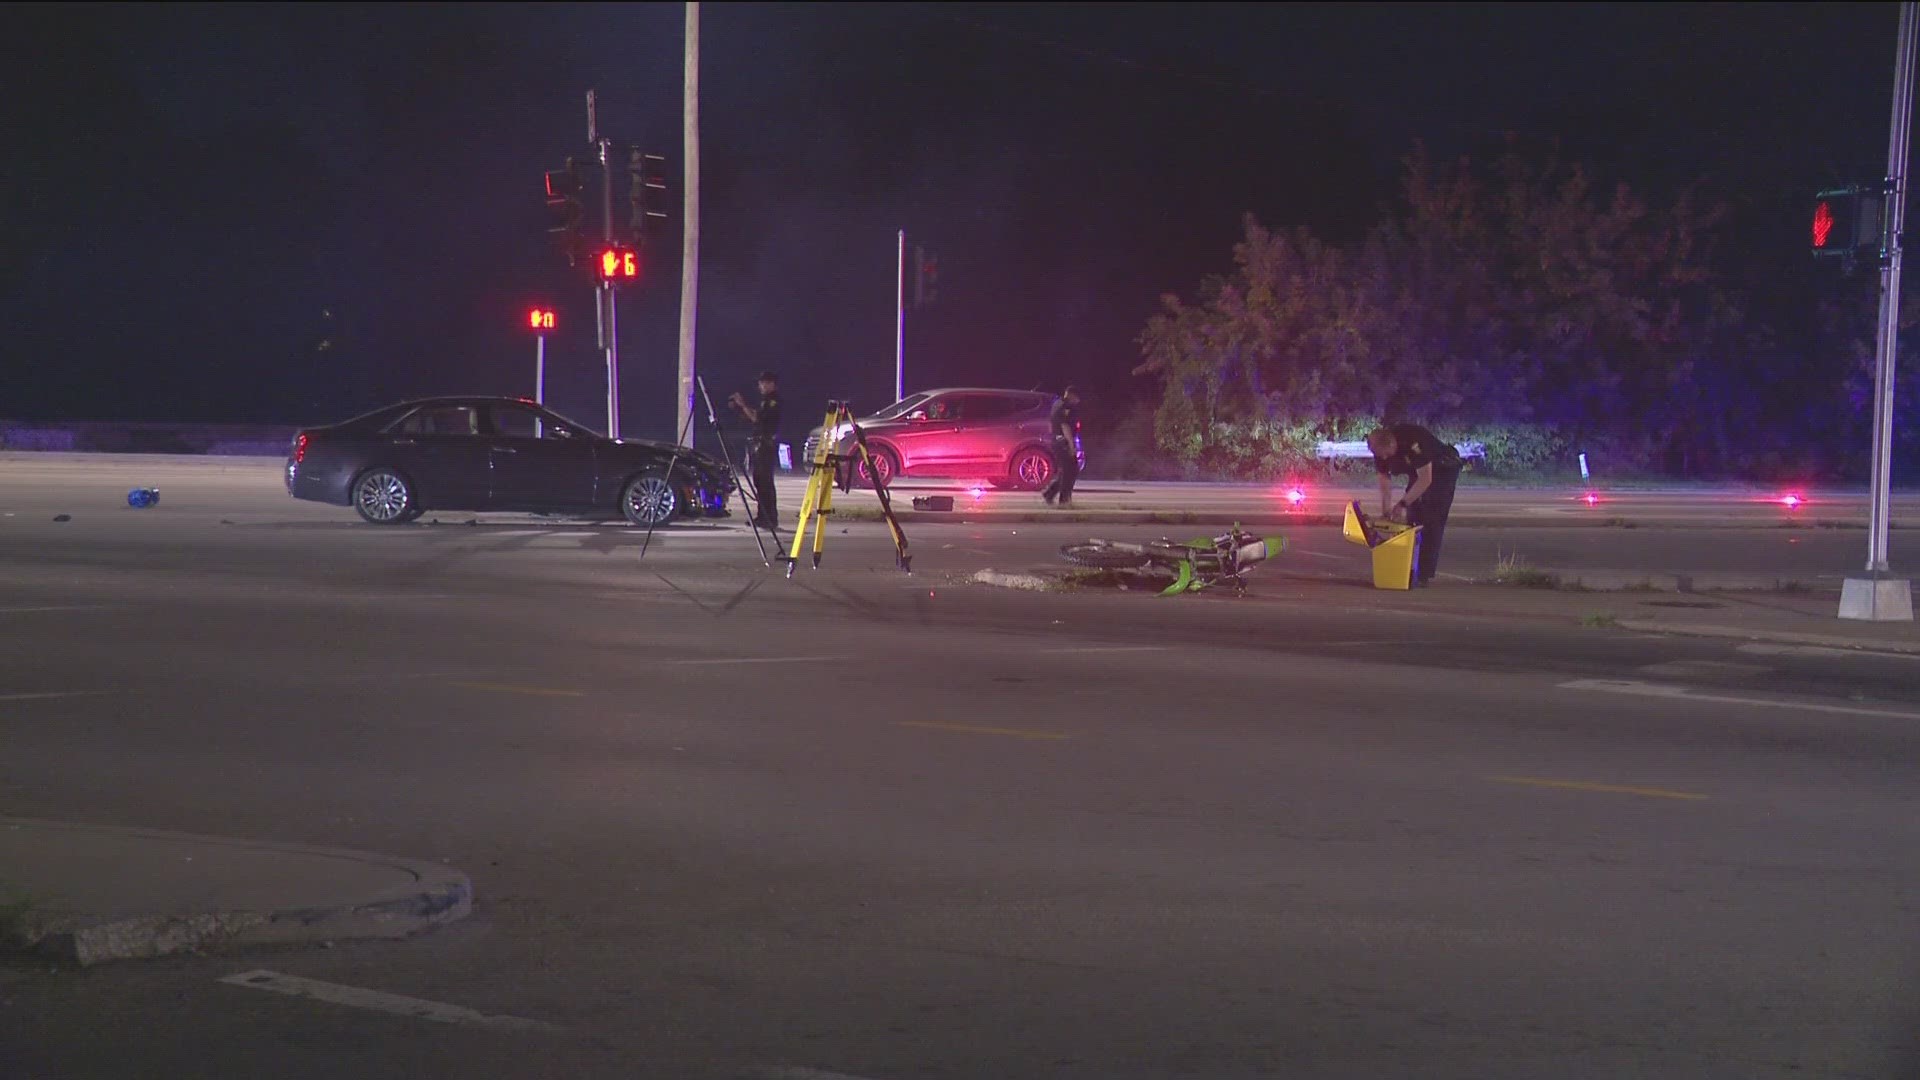 The rider is hospitalized with potentially life-threatening injuries, authorities at the scene told WTOL 11.